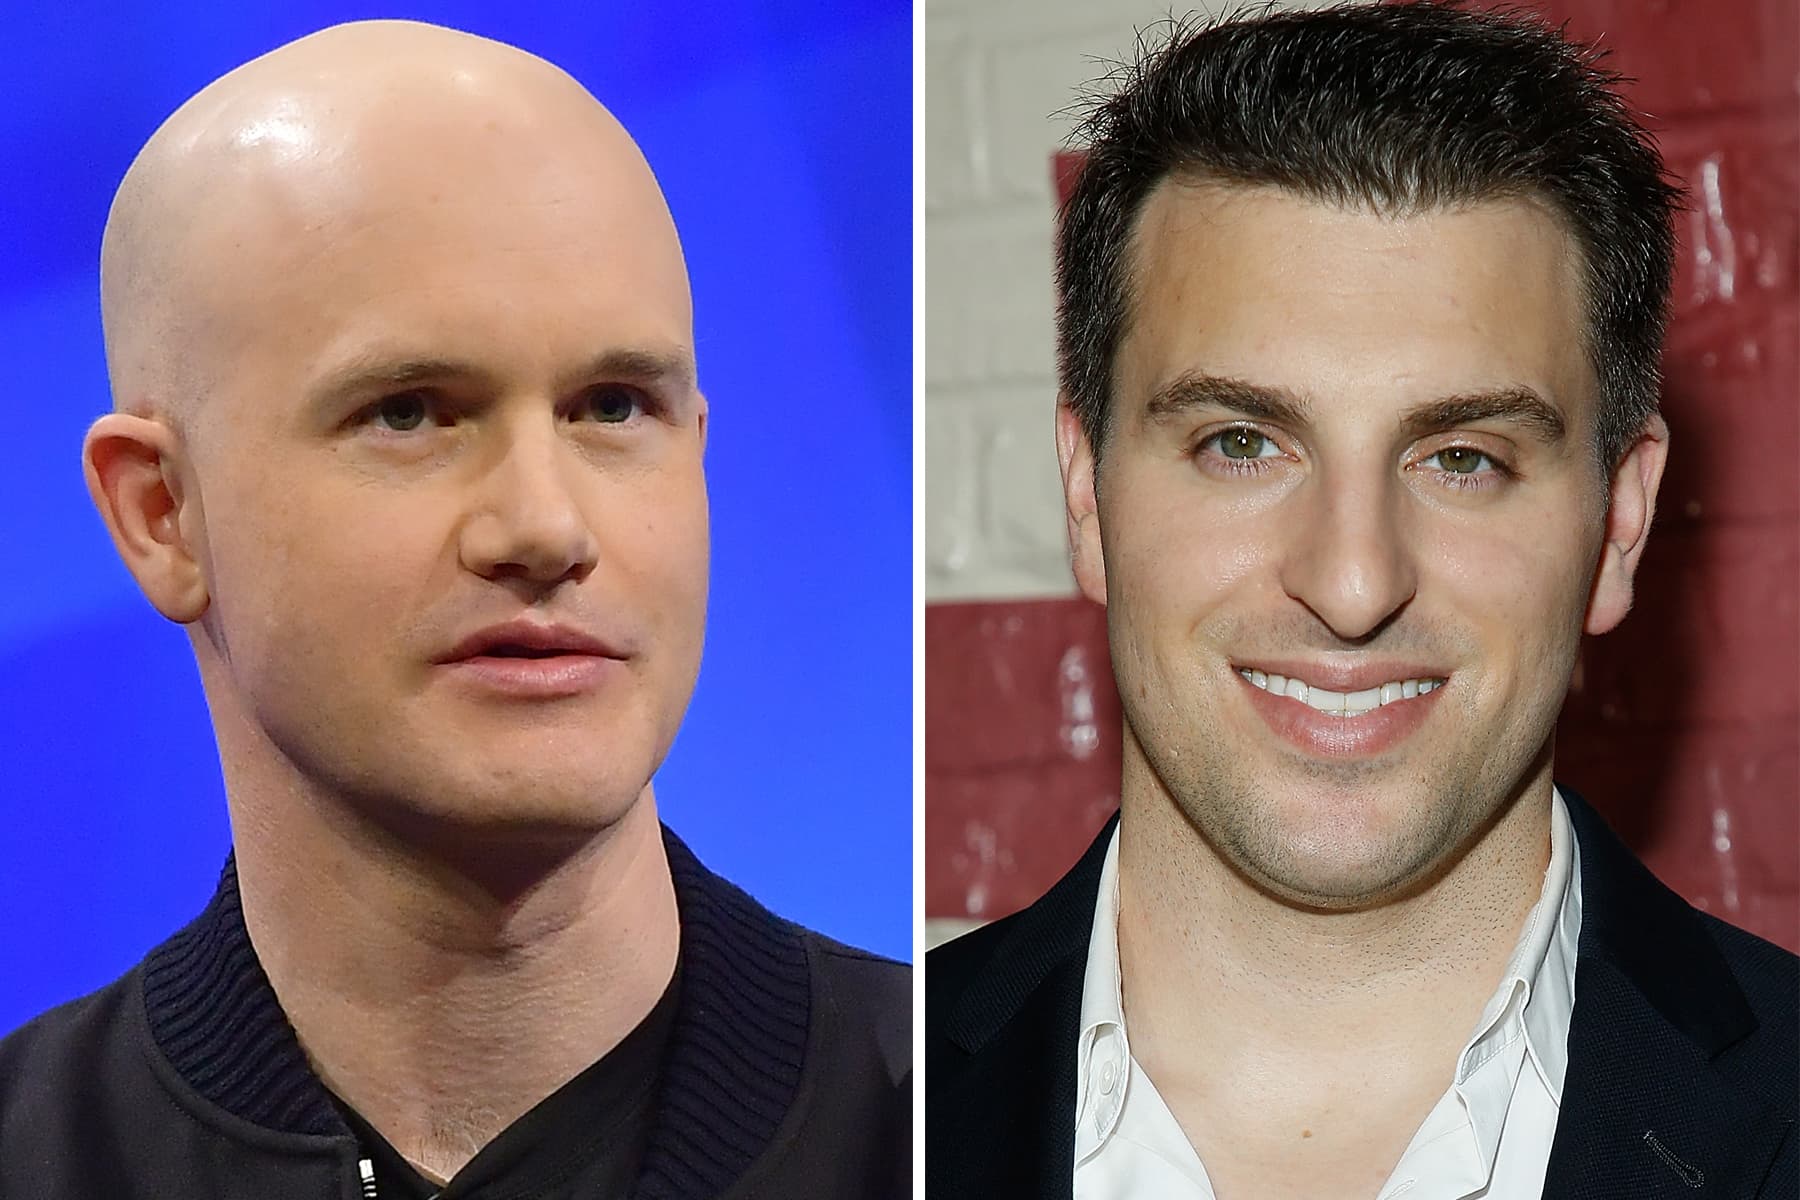 Airbnb CEO Brian Chesky ‘very proud’ of Coinbase CEO Brian Armstrong